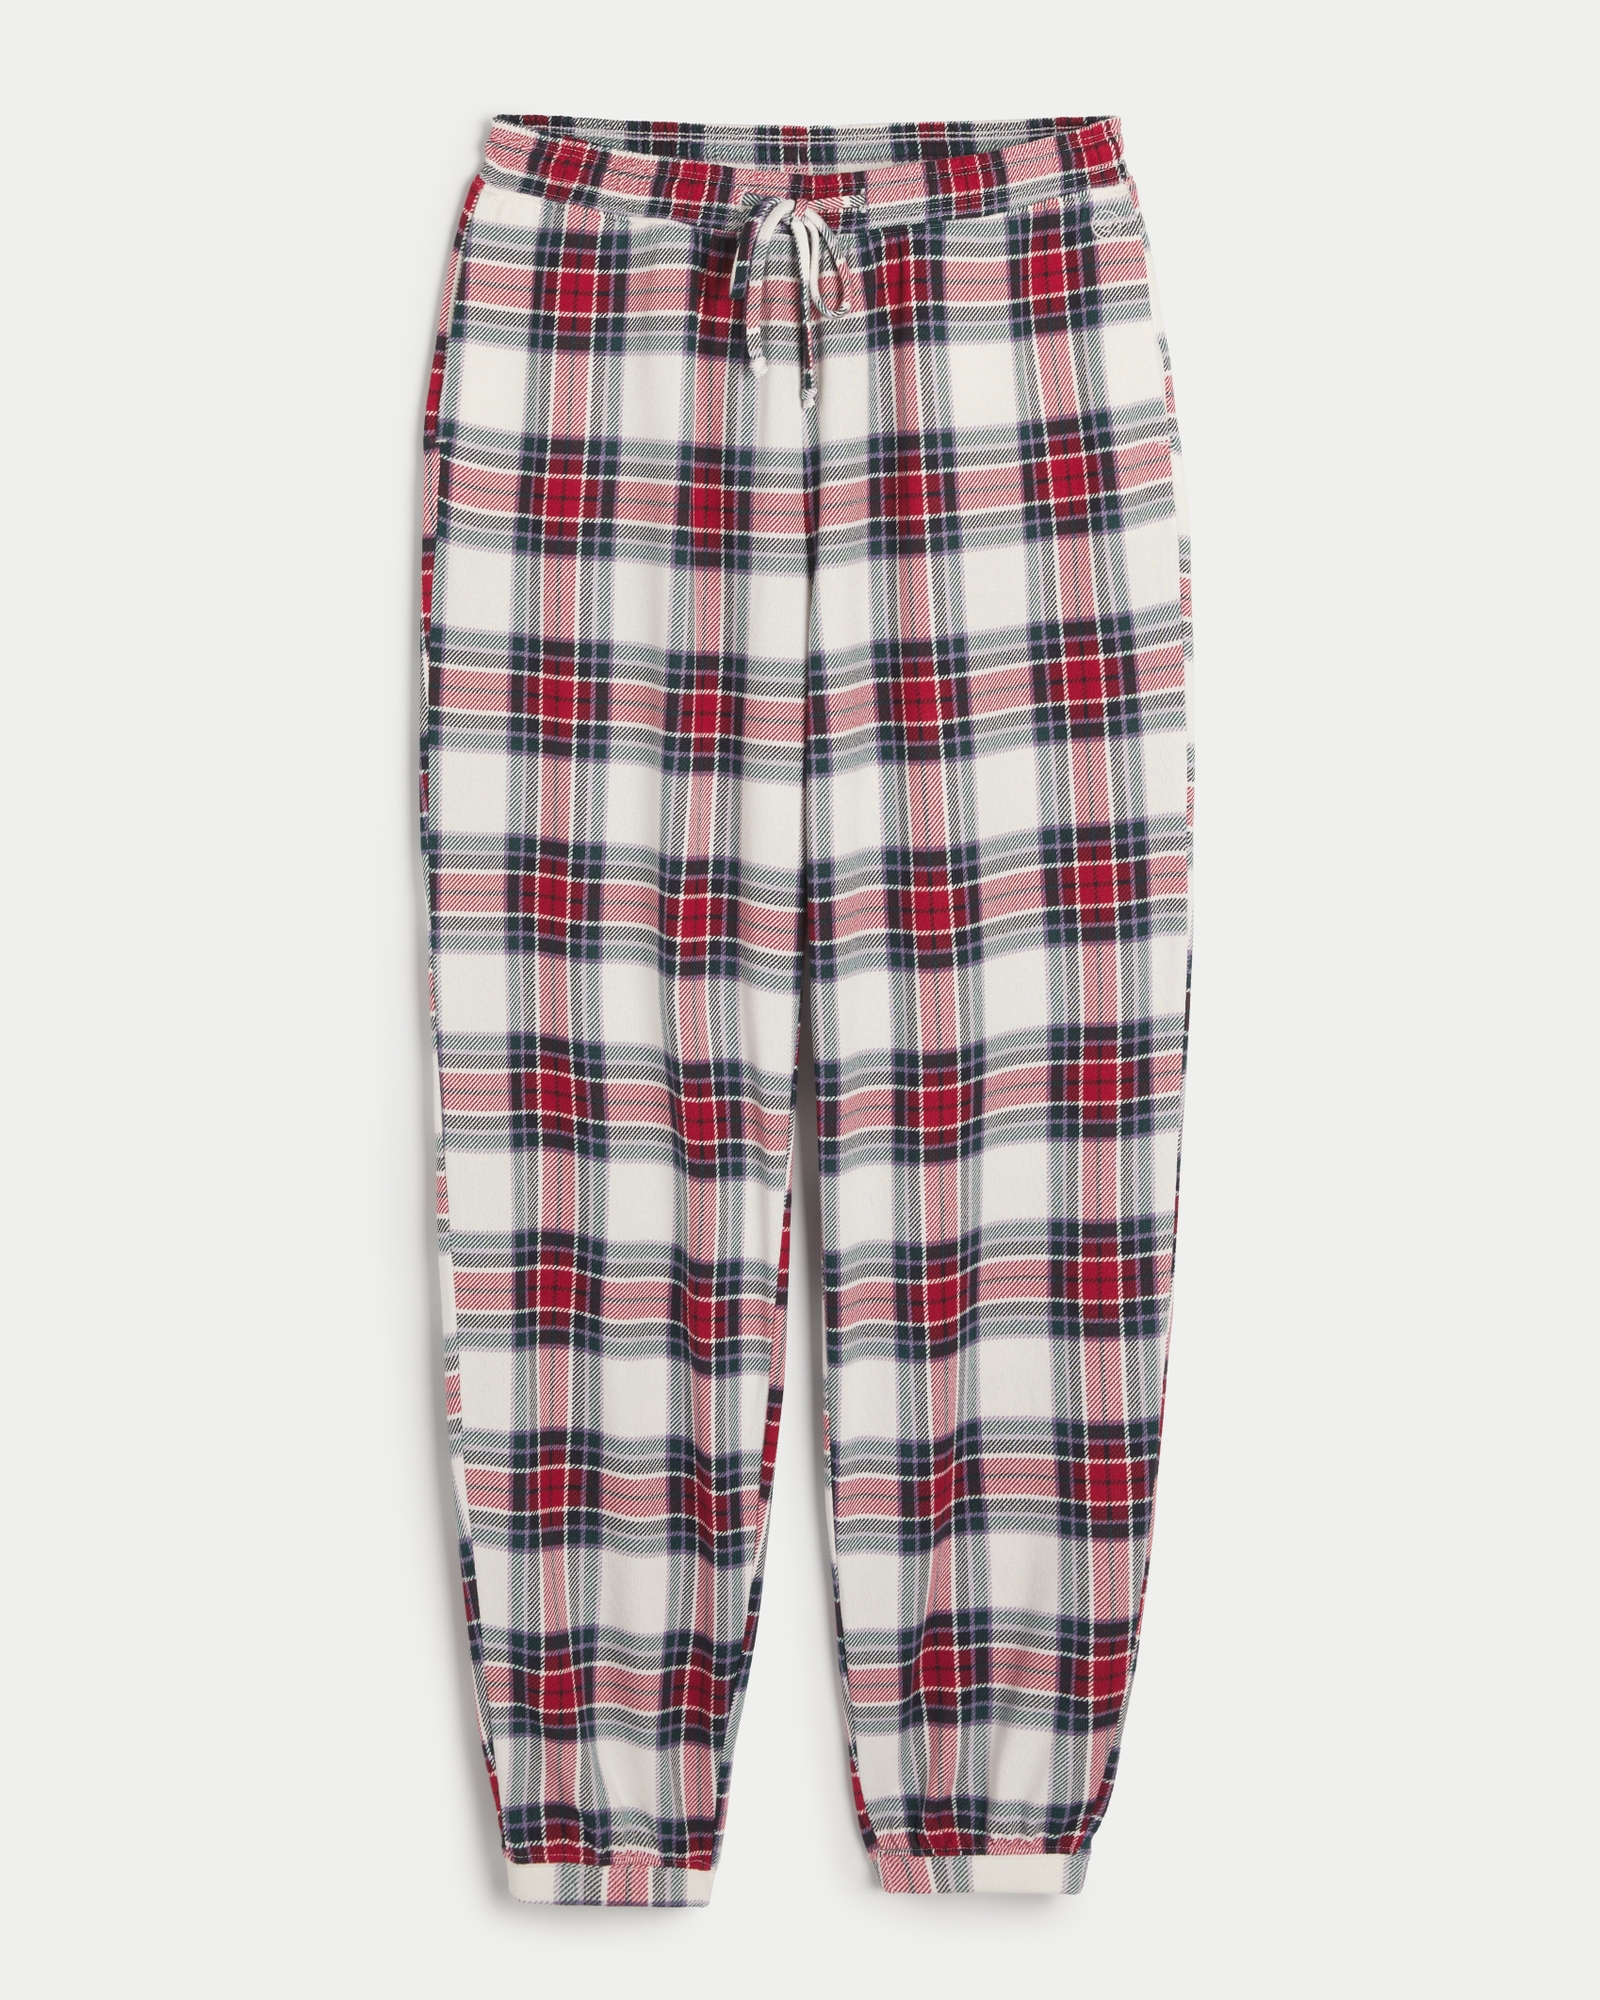 Hollister Co. Red Pajama Pants for Women